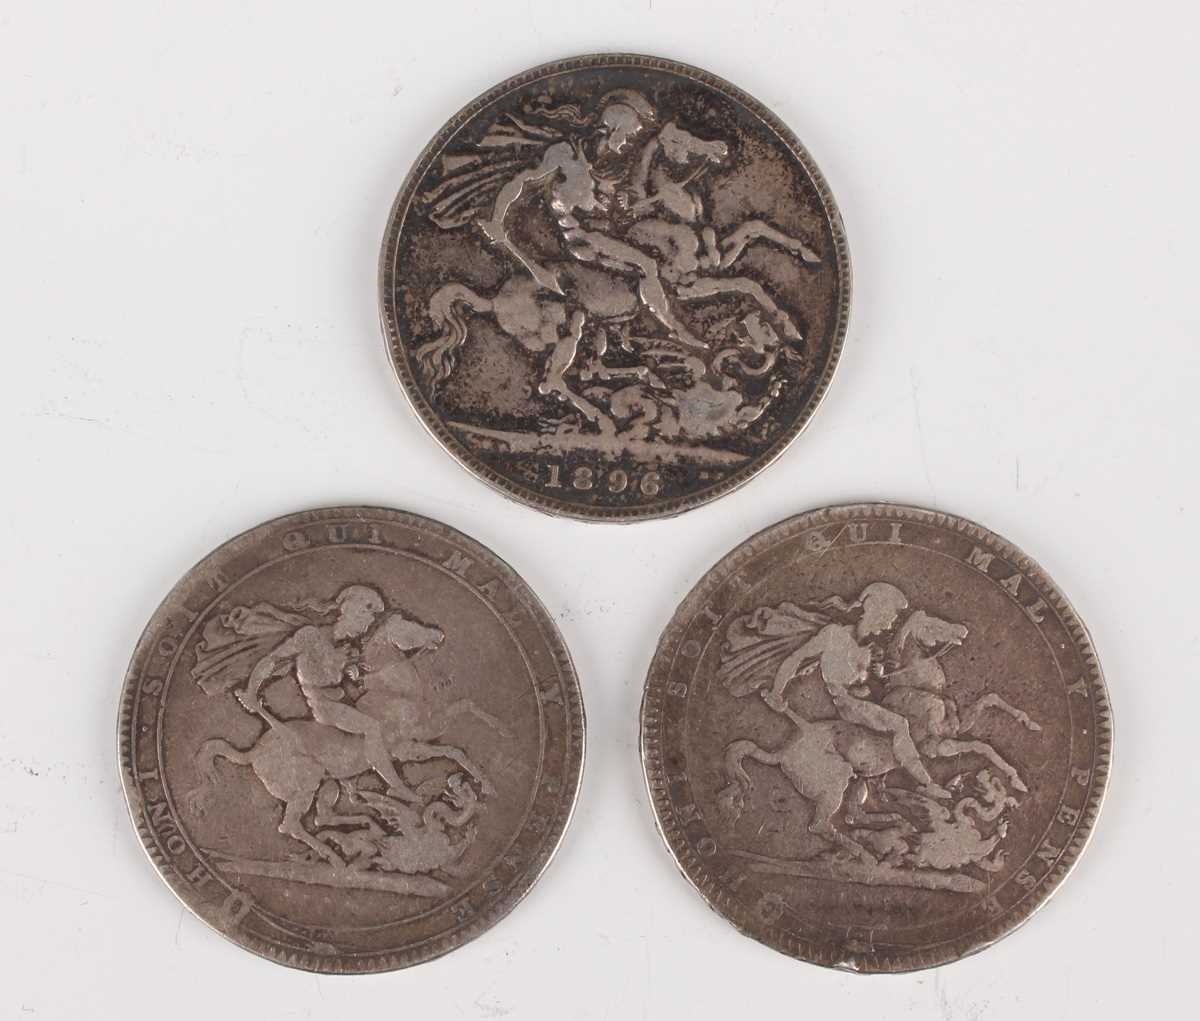 A small collection of coins and banknotes, including two George III crowns, 1819 and 1820, a - Image 3 of 6